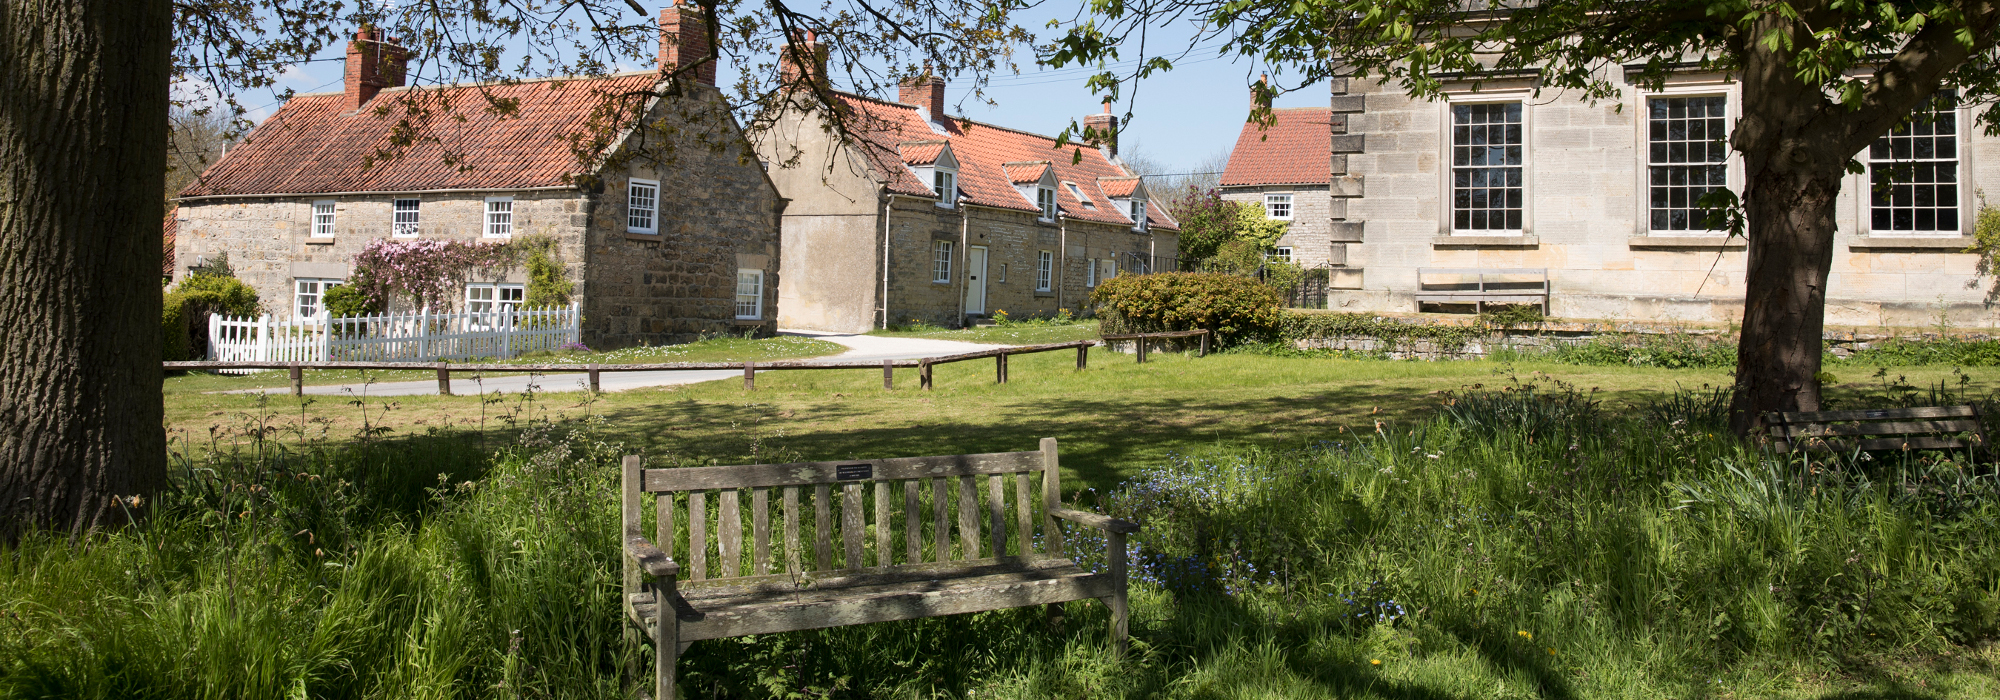 Holiday Cottages near York